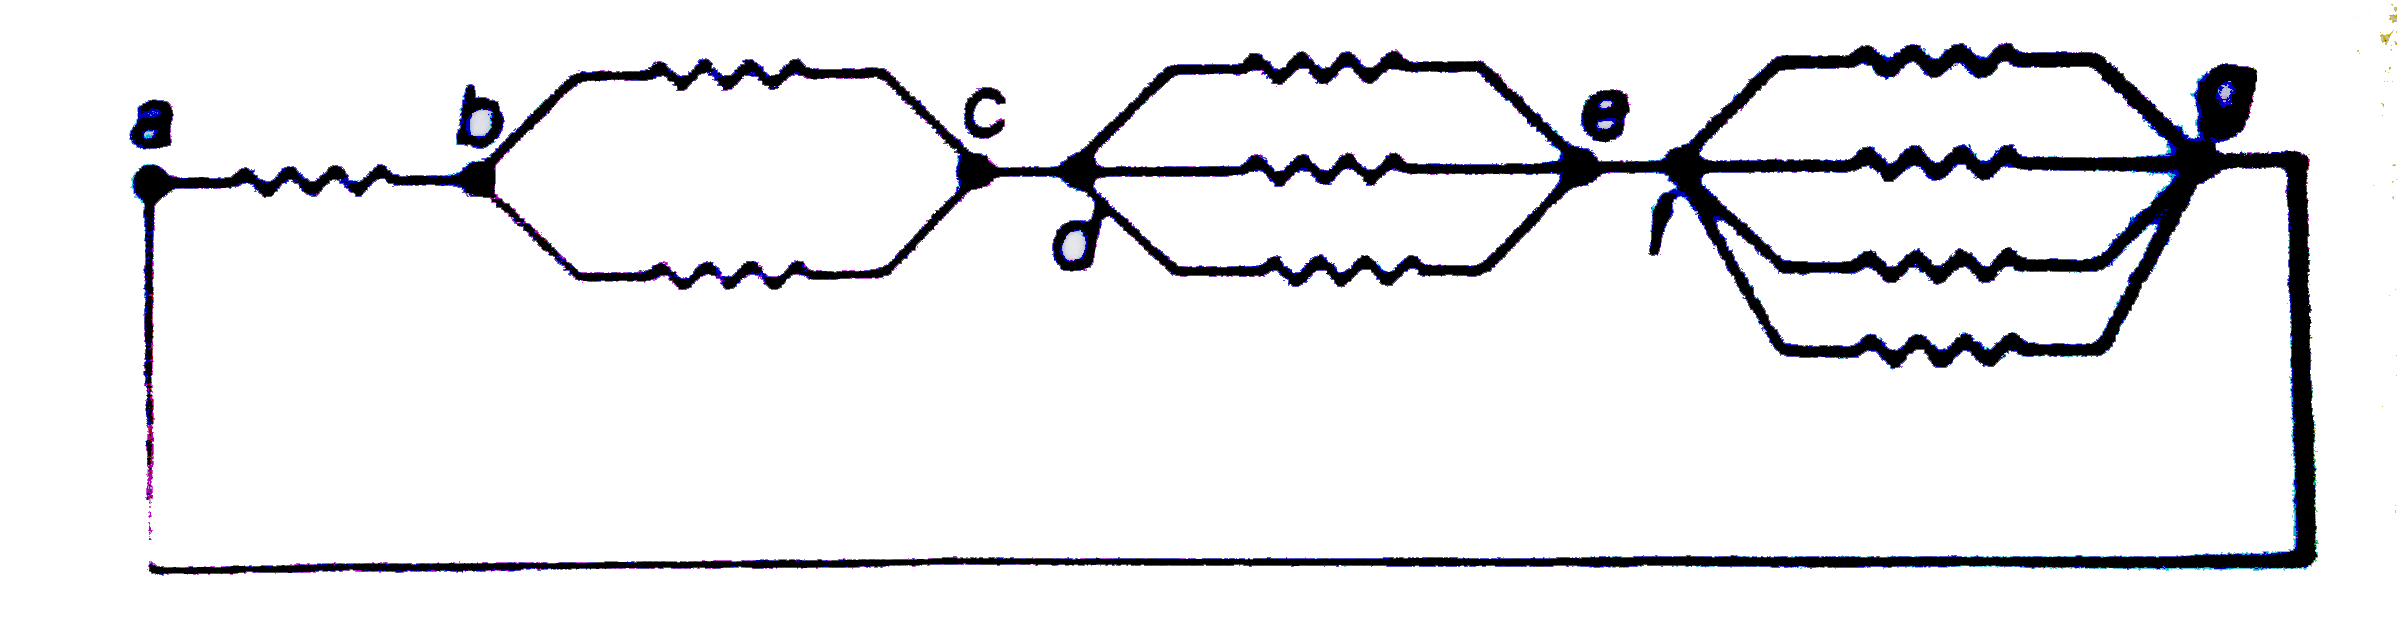 In the circuit shown in figure resistance of each wire is r. Net resistance across